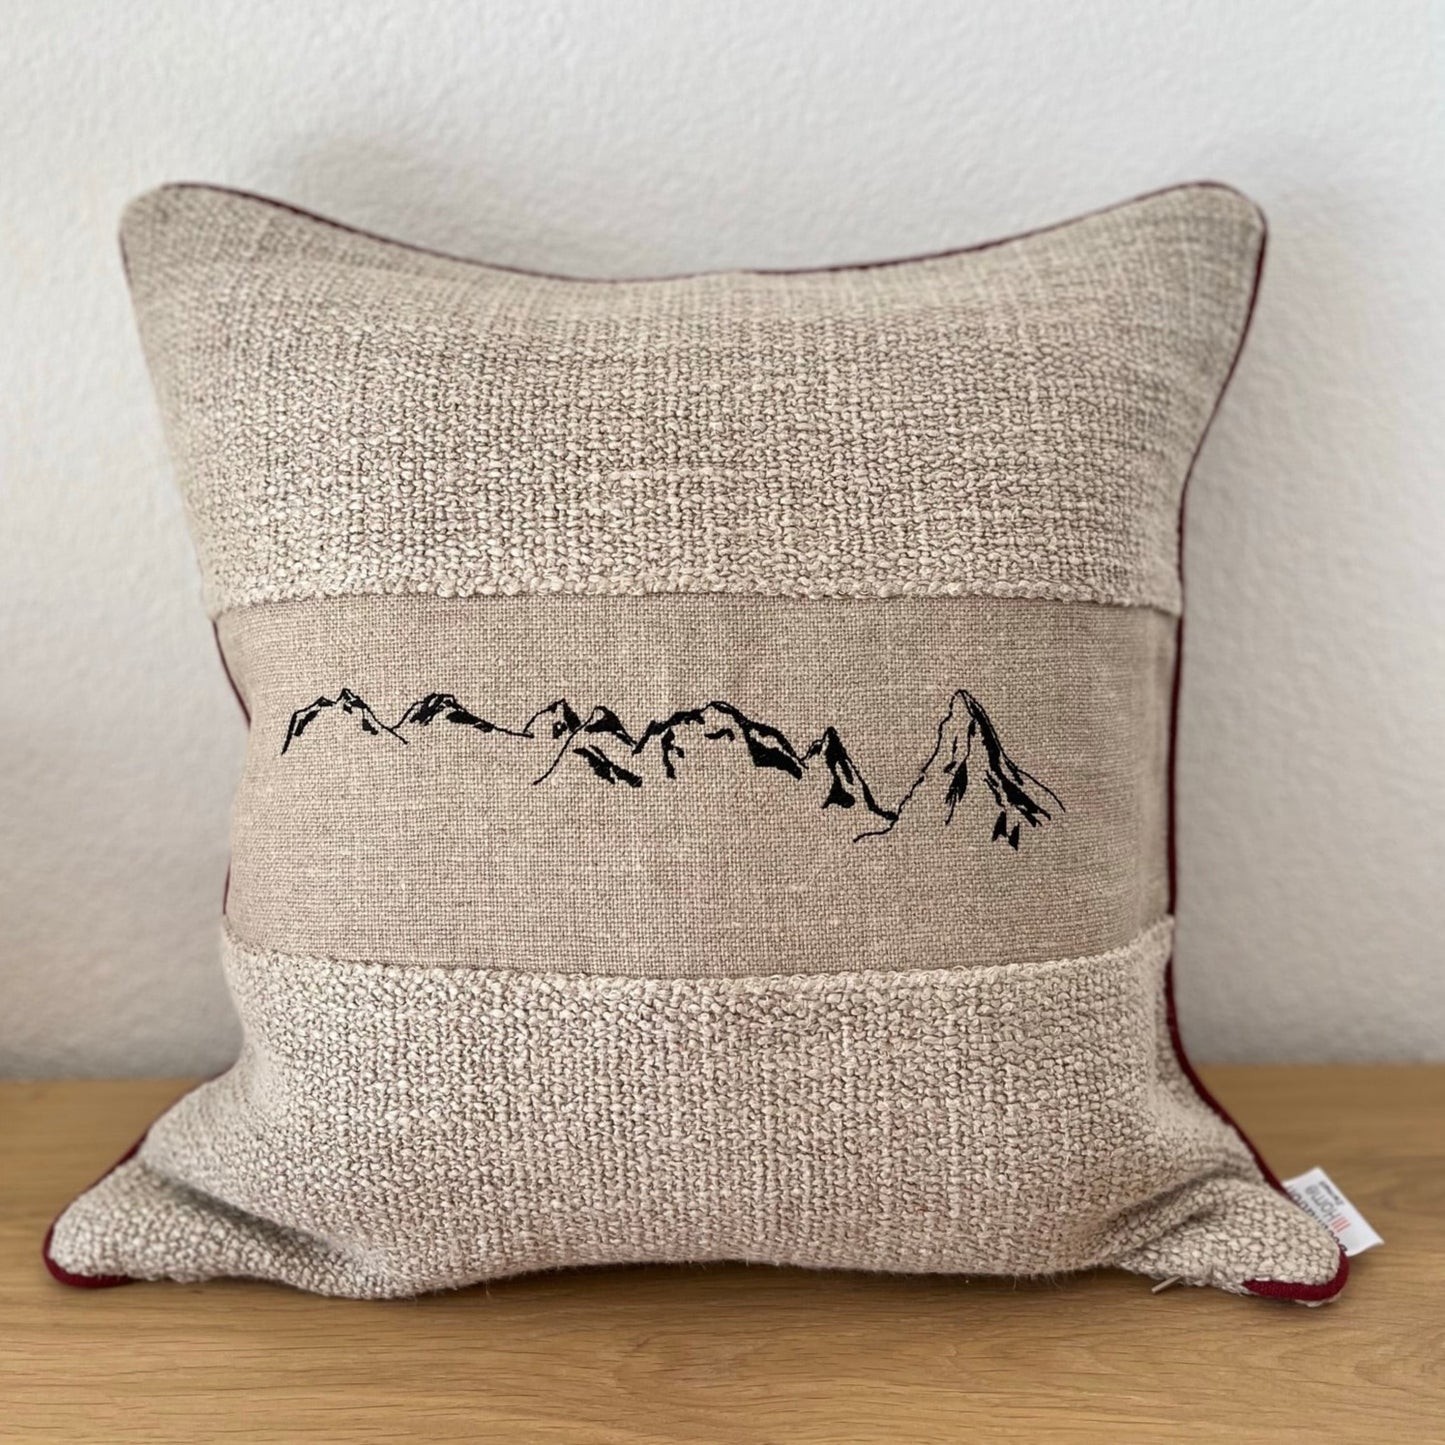 Mountain Panorama cushion cover, red piping